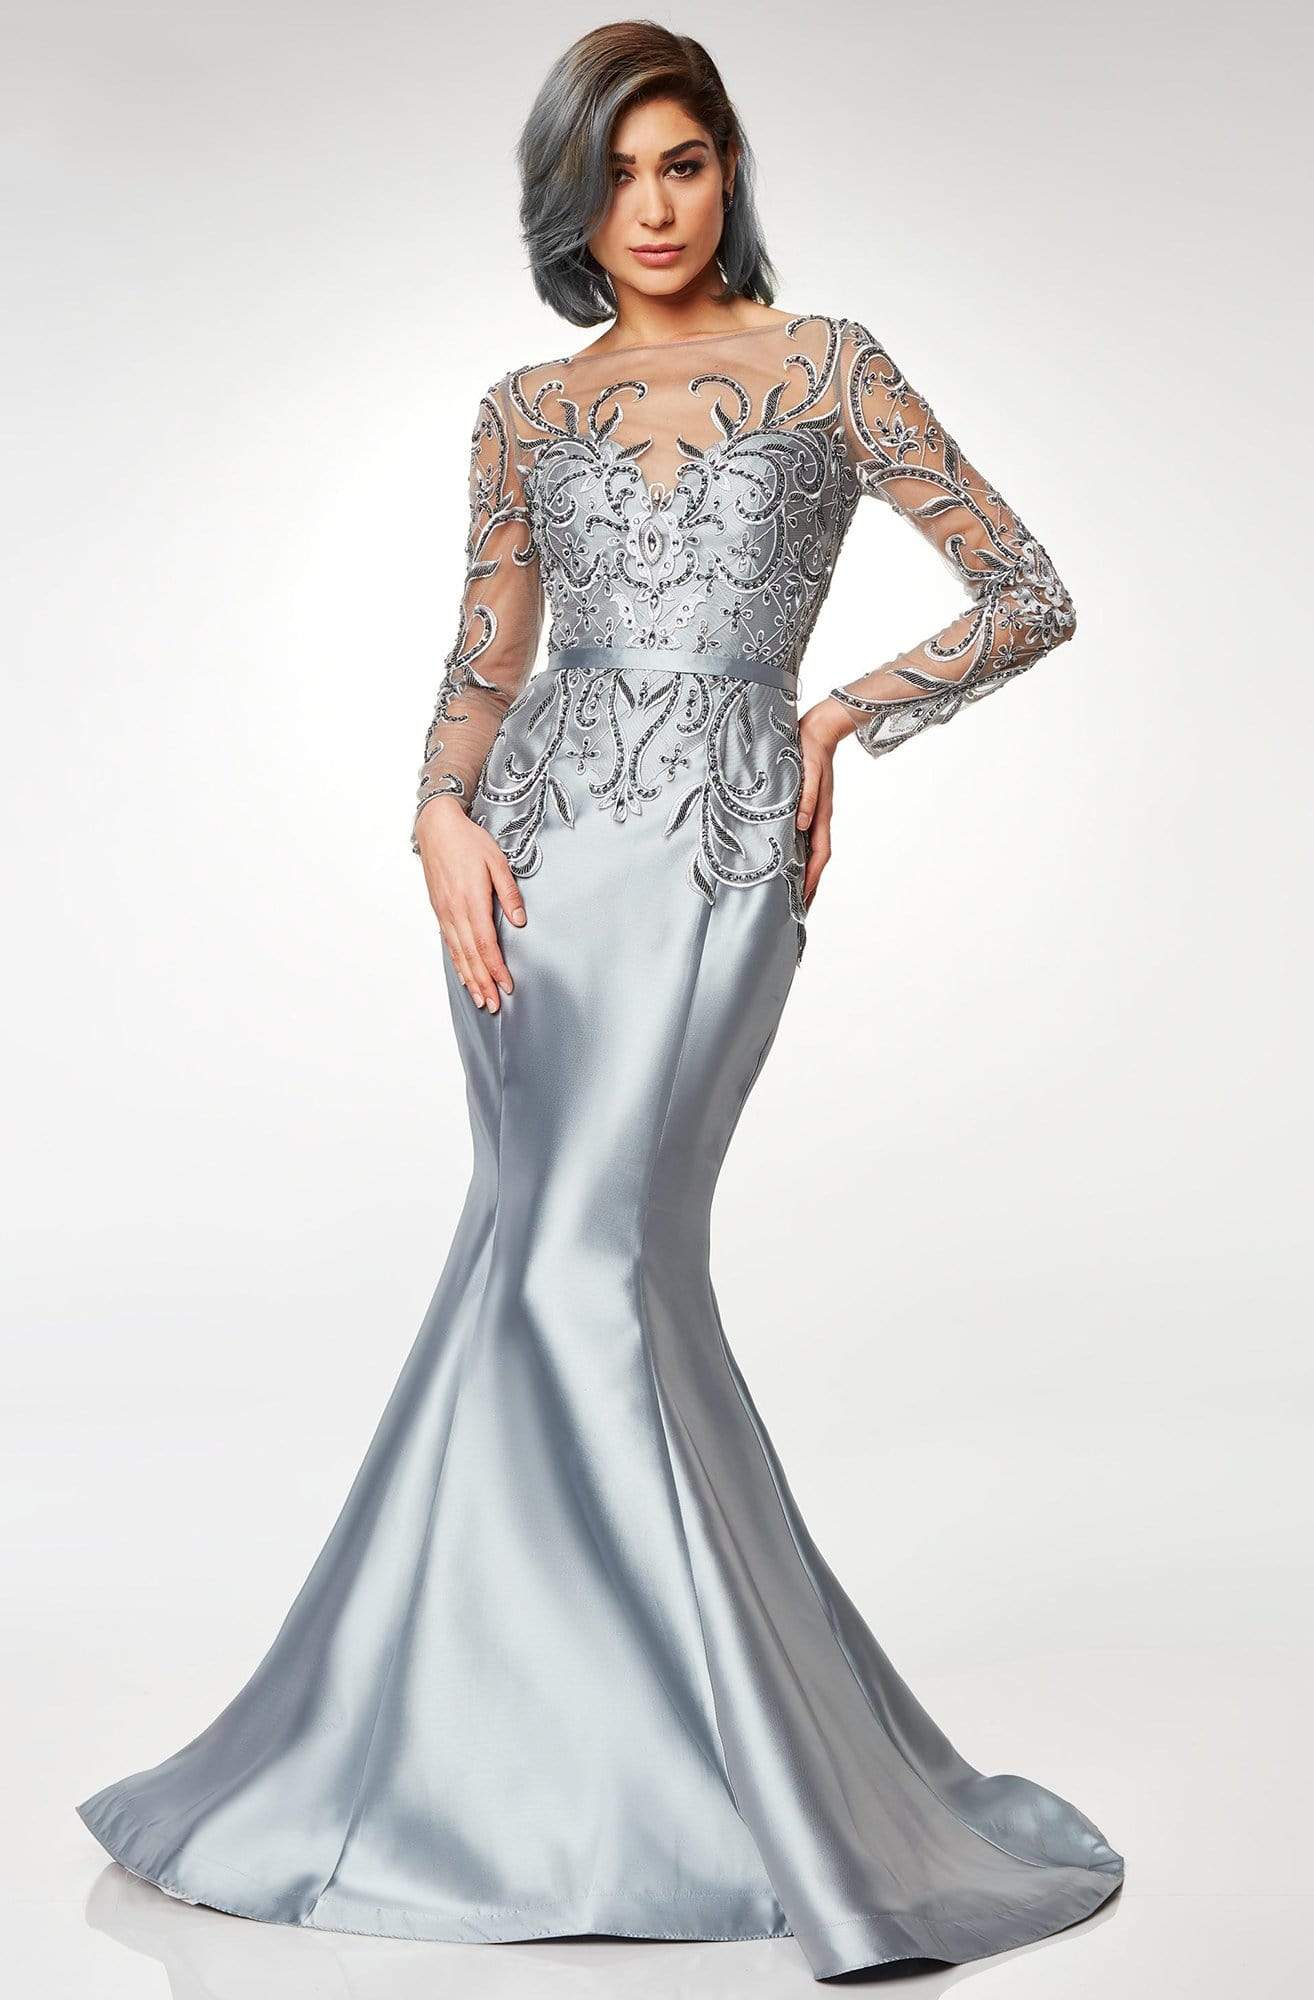 Clarisse - M6523 Embellished Illusion Bateau Mikado Mermaid Gown Special Occasion Dress 6 / Silver